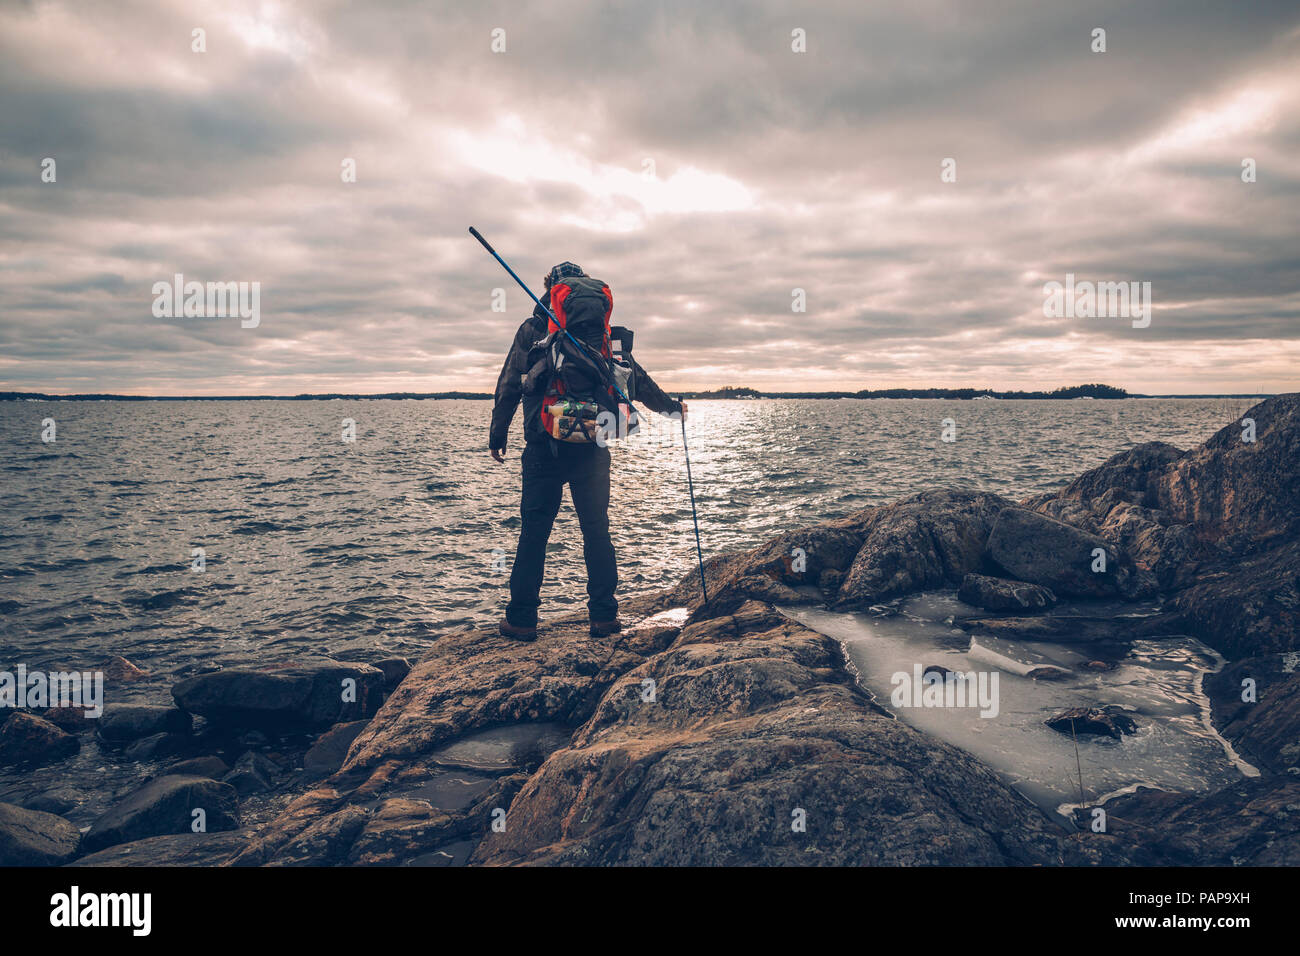 Sweden, Sodermanland, backpacker standing at the seashore under cloudy sky Stock Photo